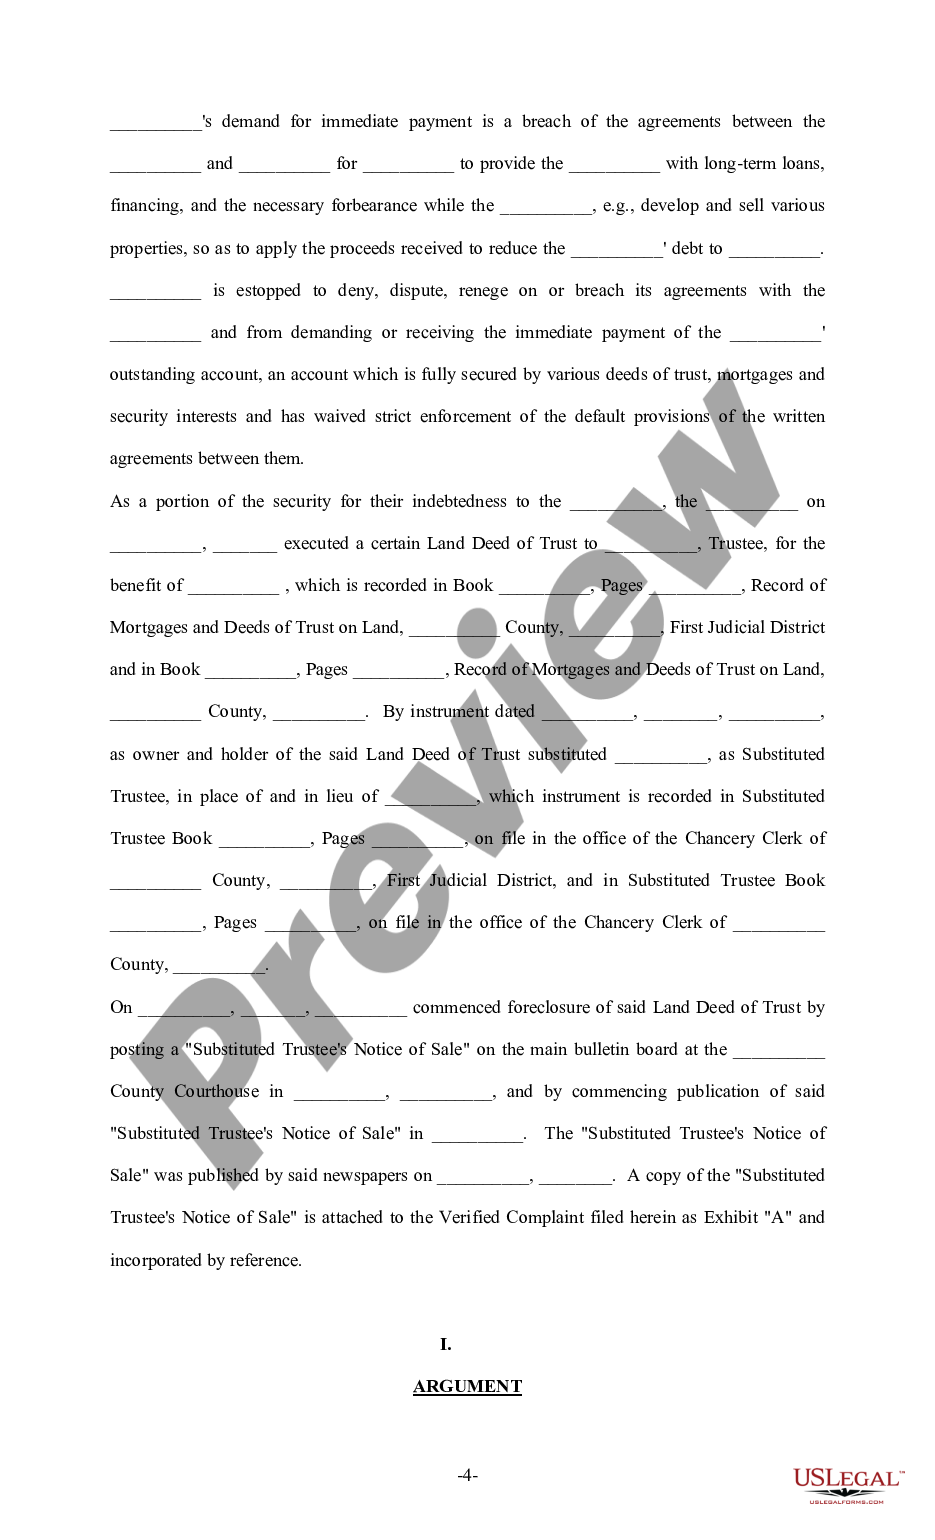 page 3 Sample Brief - Injunction preview